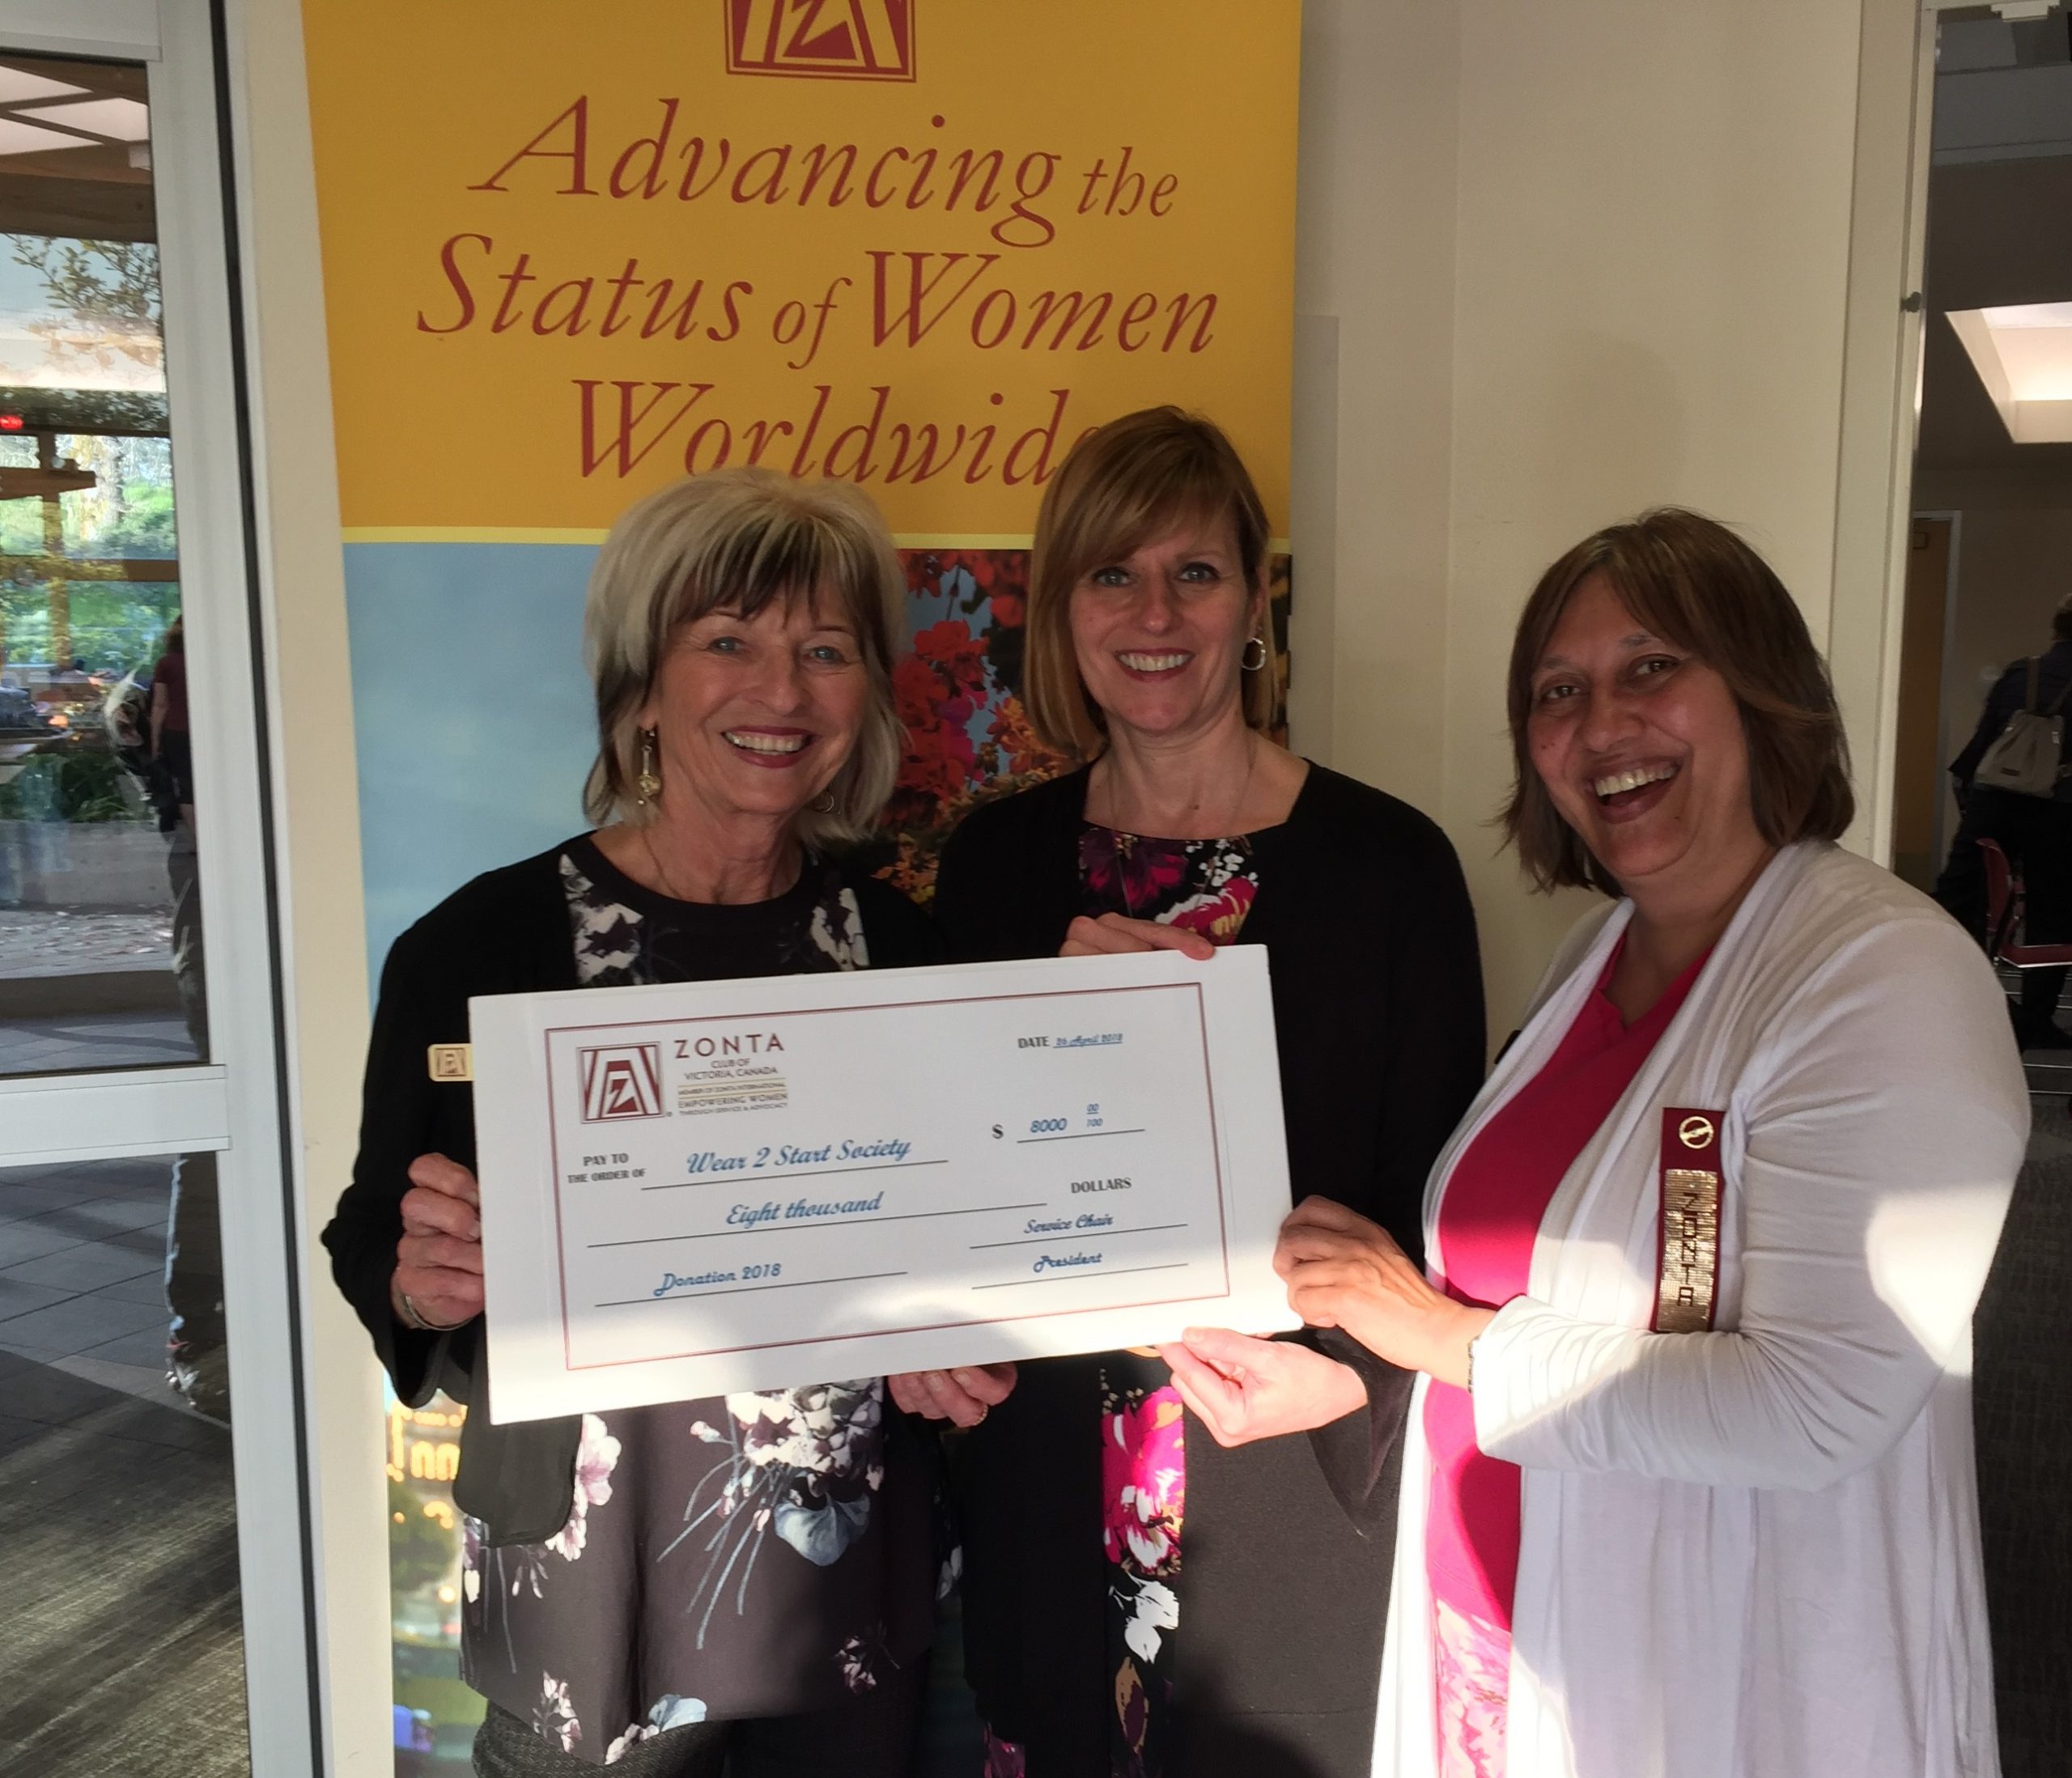 Zonta Victoria continues to bolster W2S